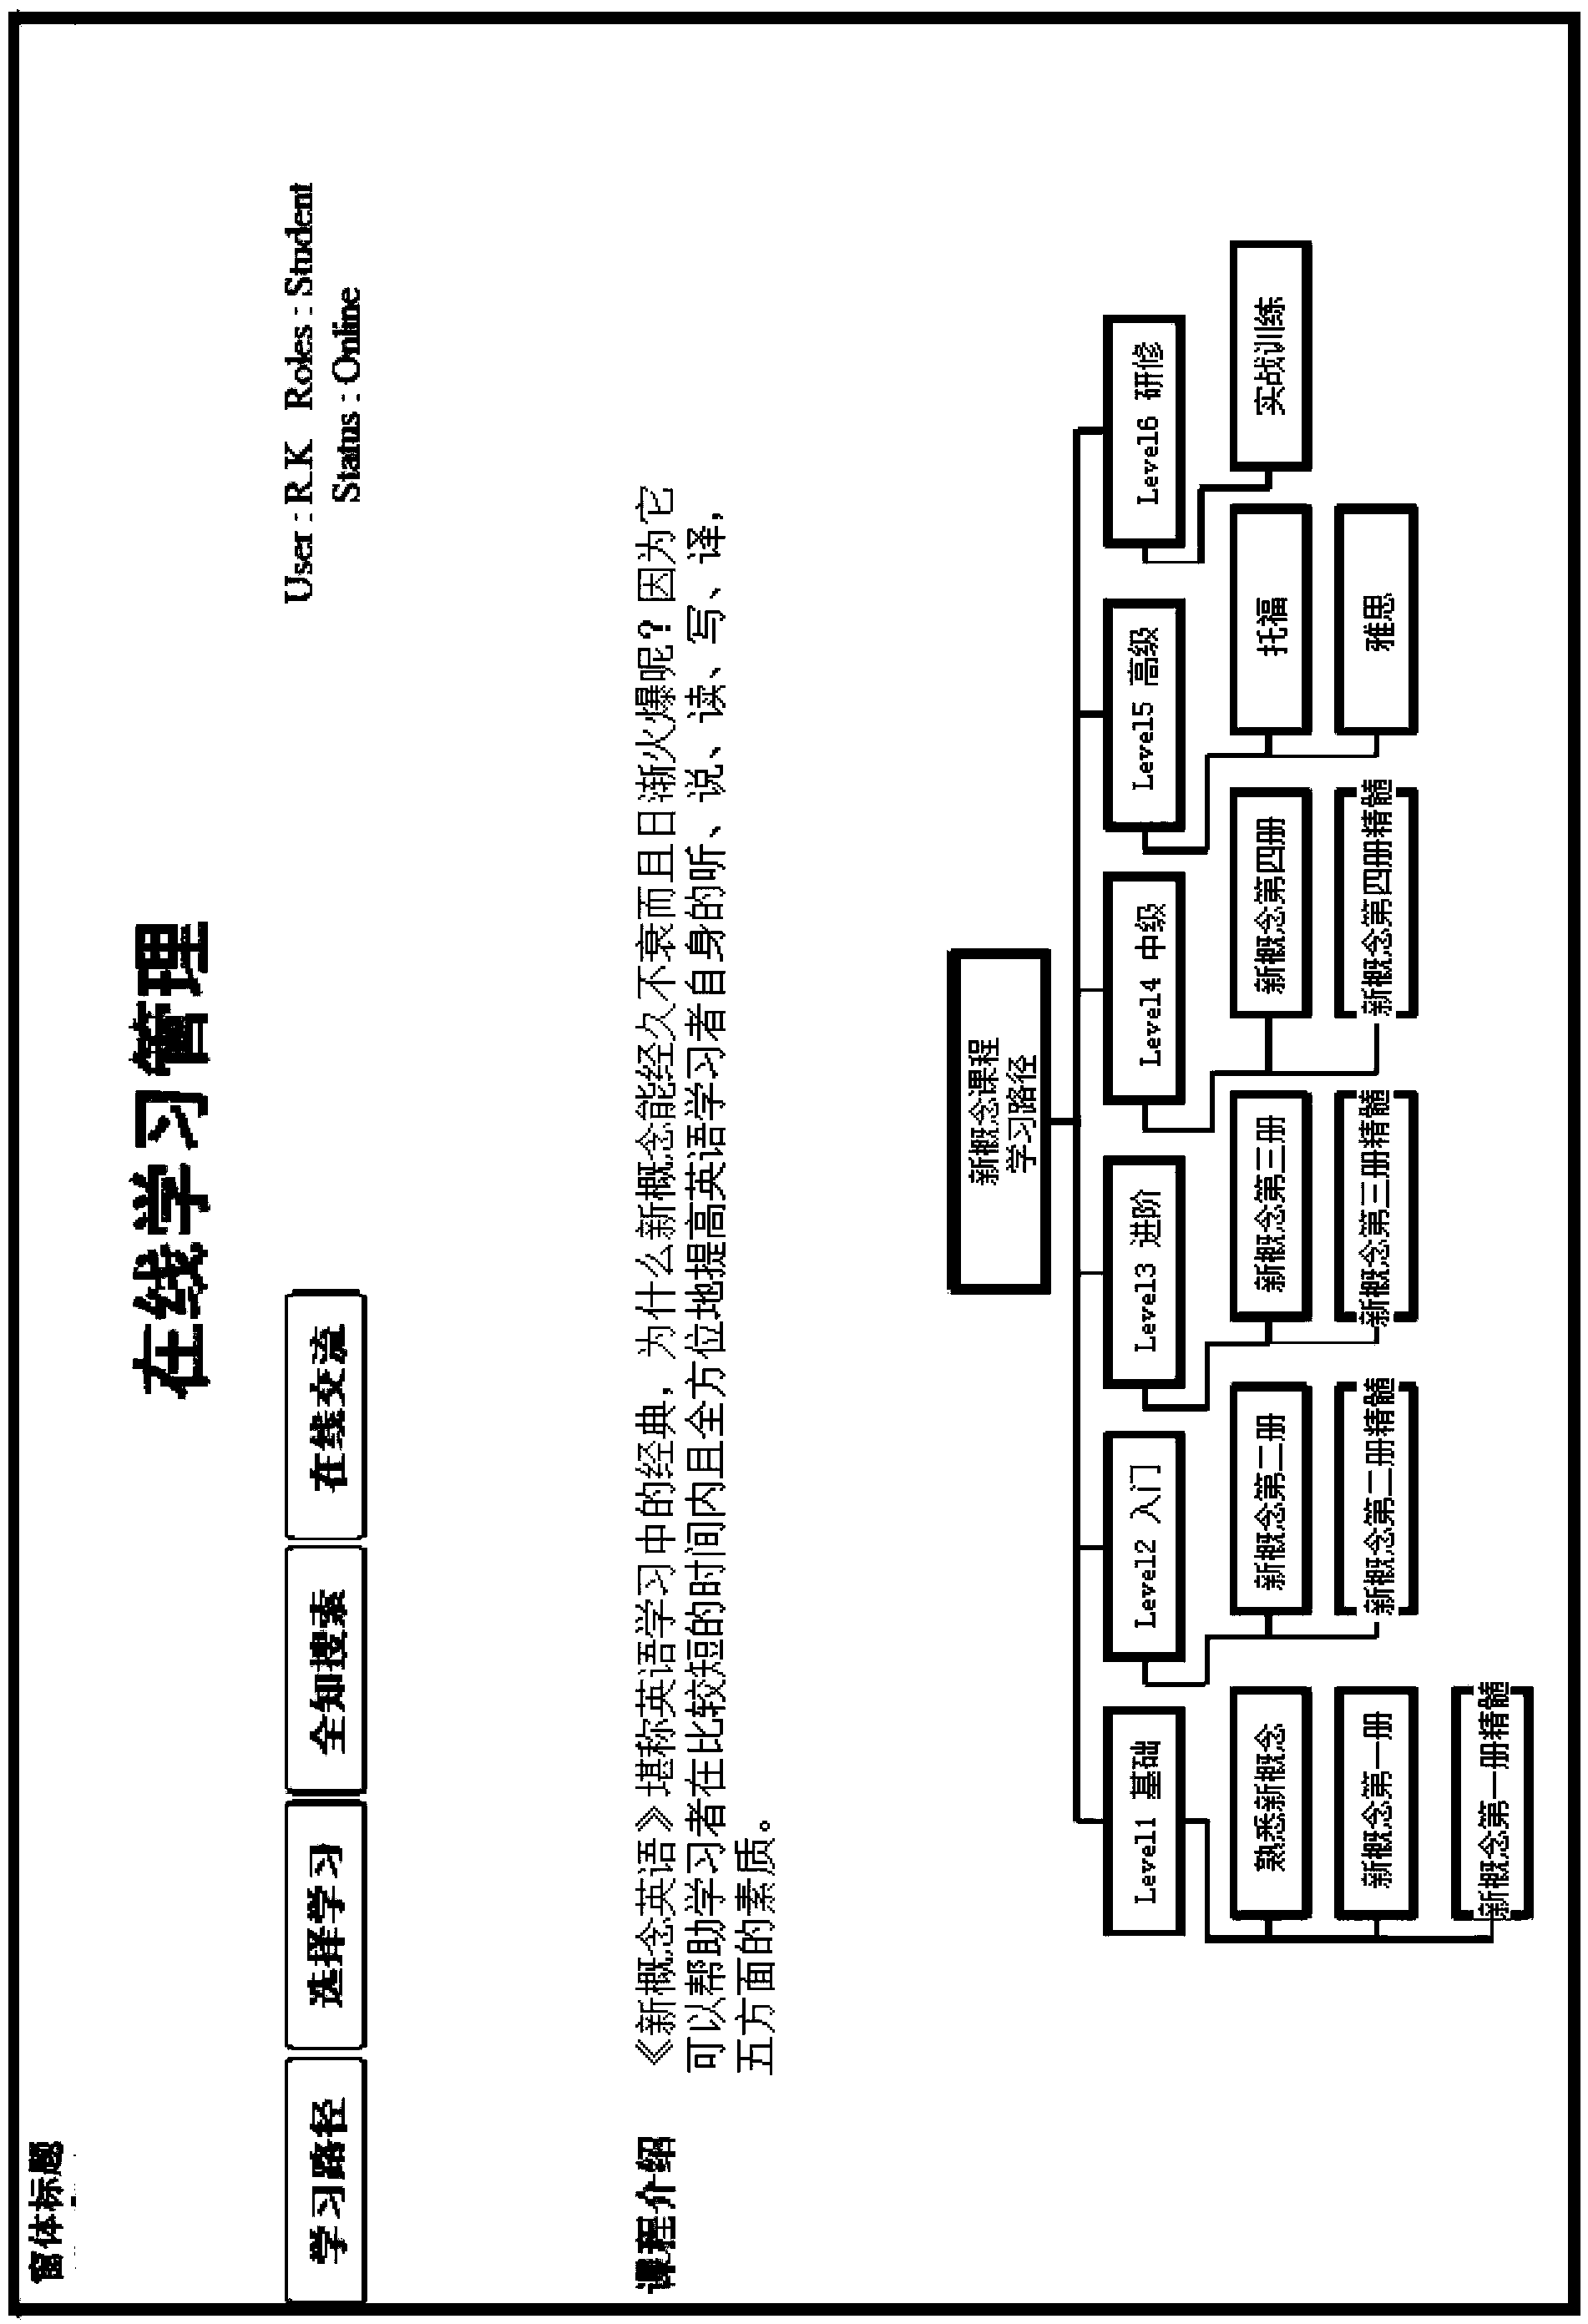 Operating method of language experience teaching system